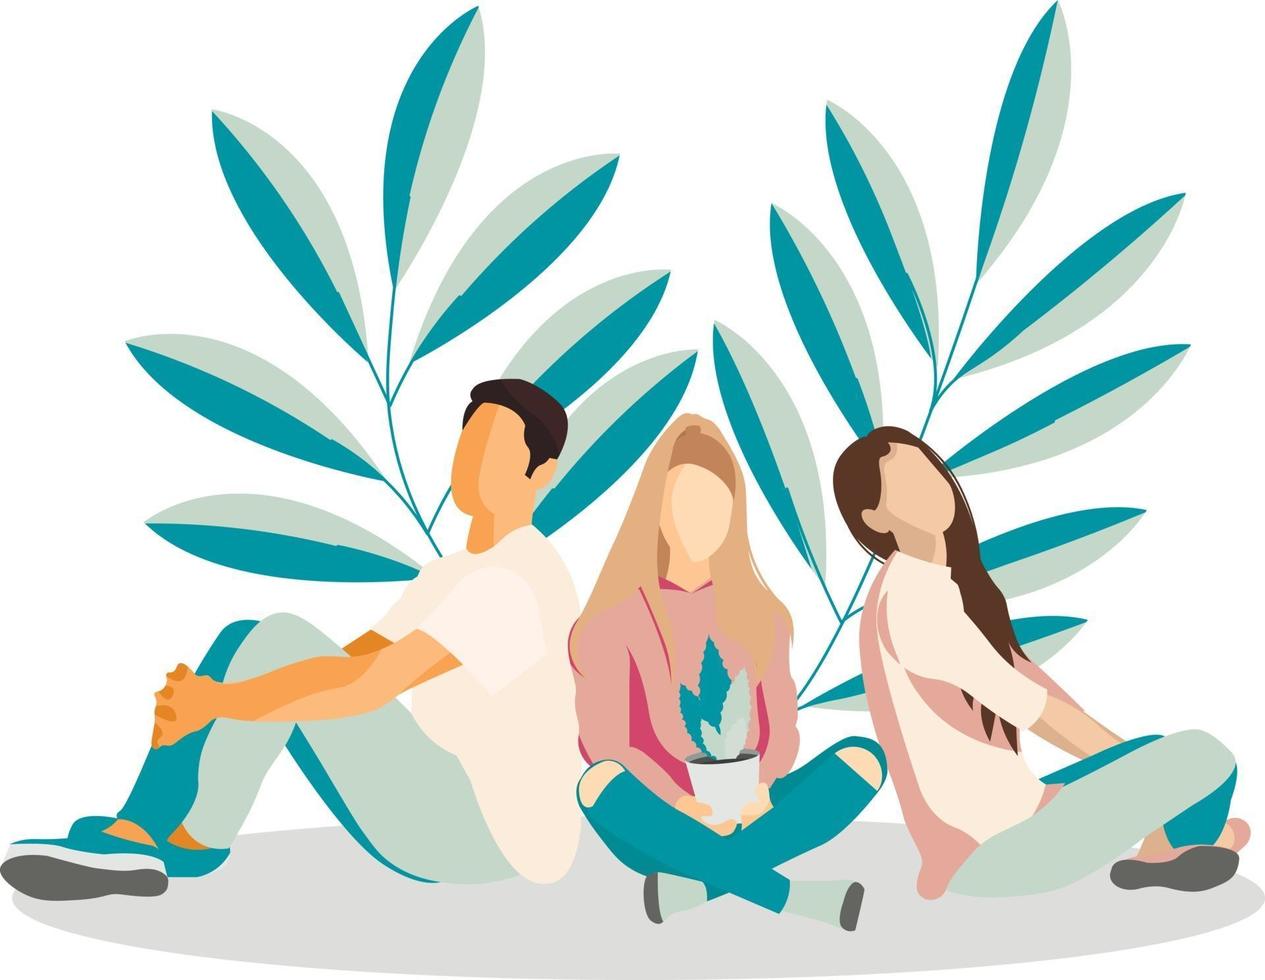 Young people sit relaxed. Girls and guy on a background with branches. vector